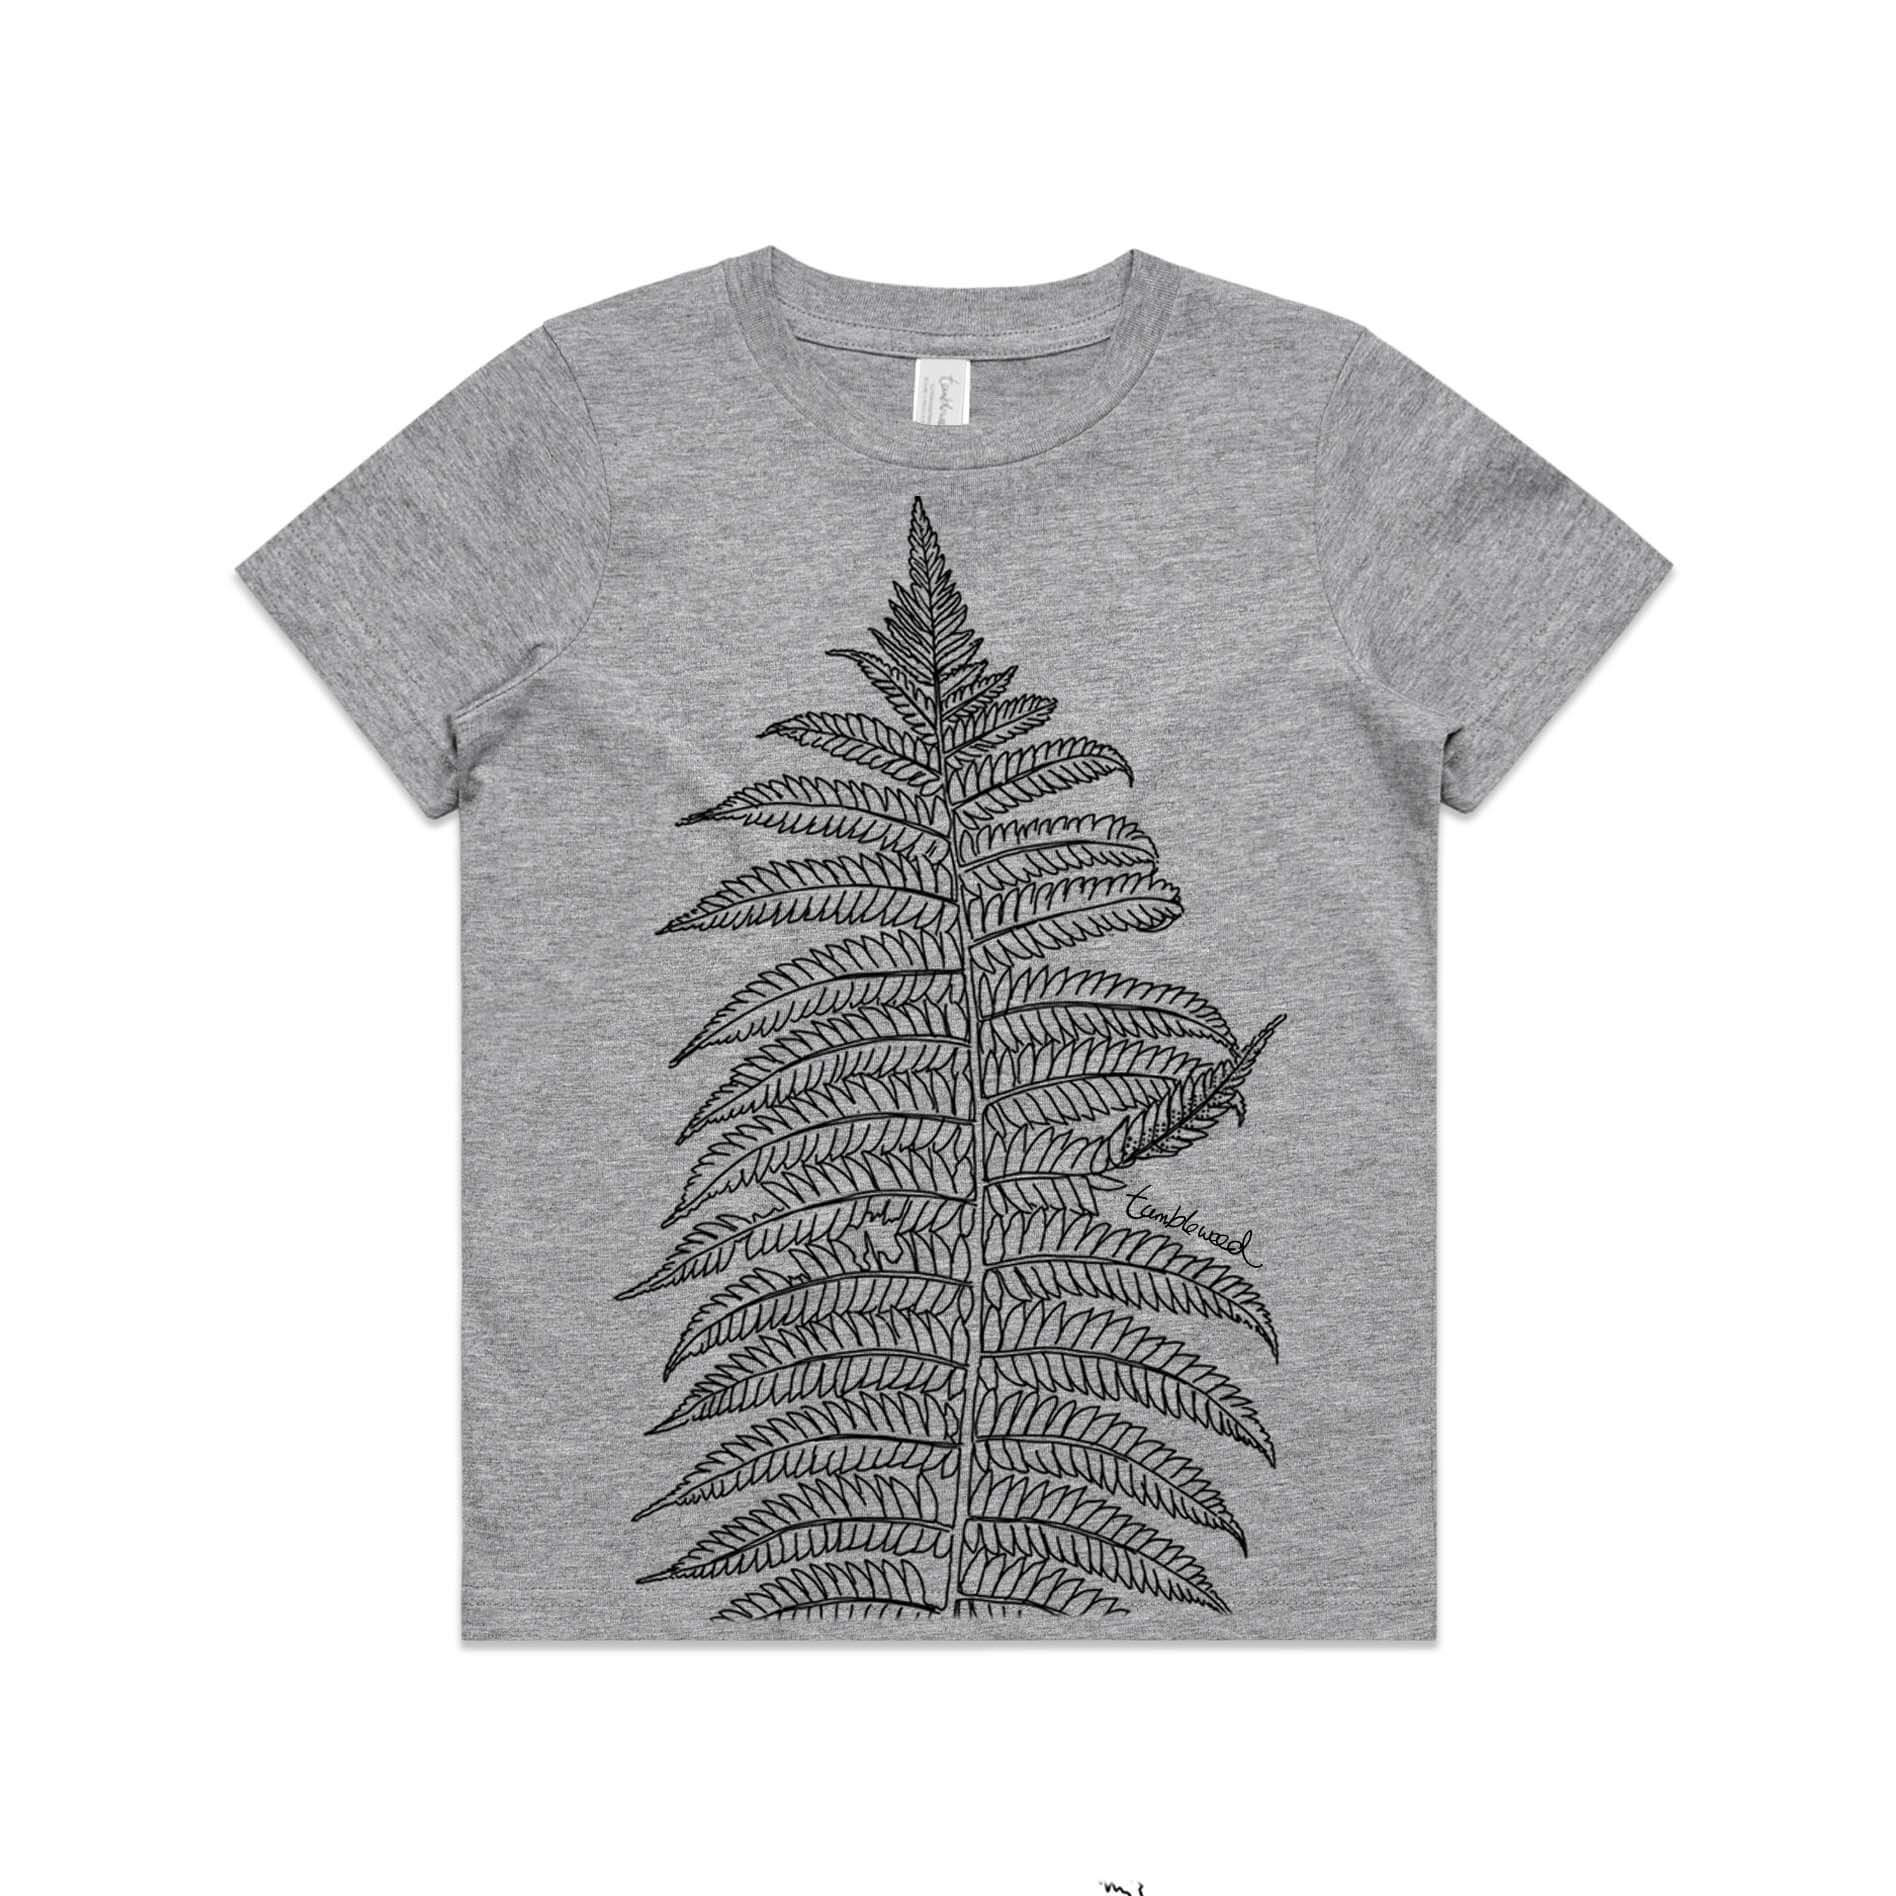 Grey marle, cotton kids' t-shirt with screen printed Silver fern/ponga design.